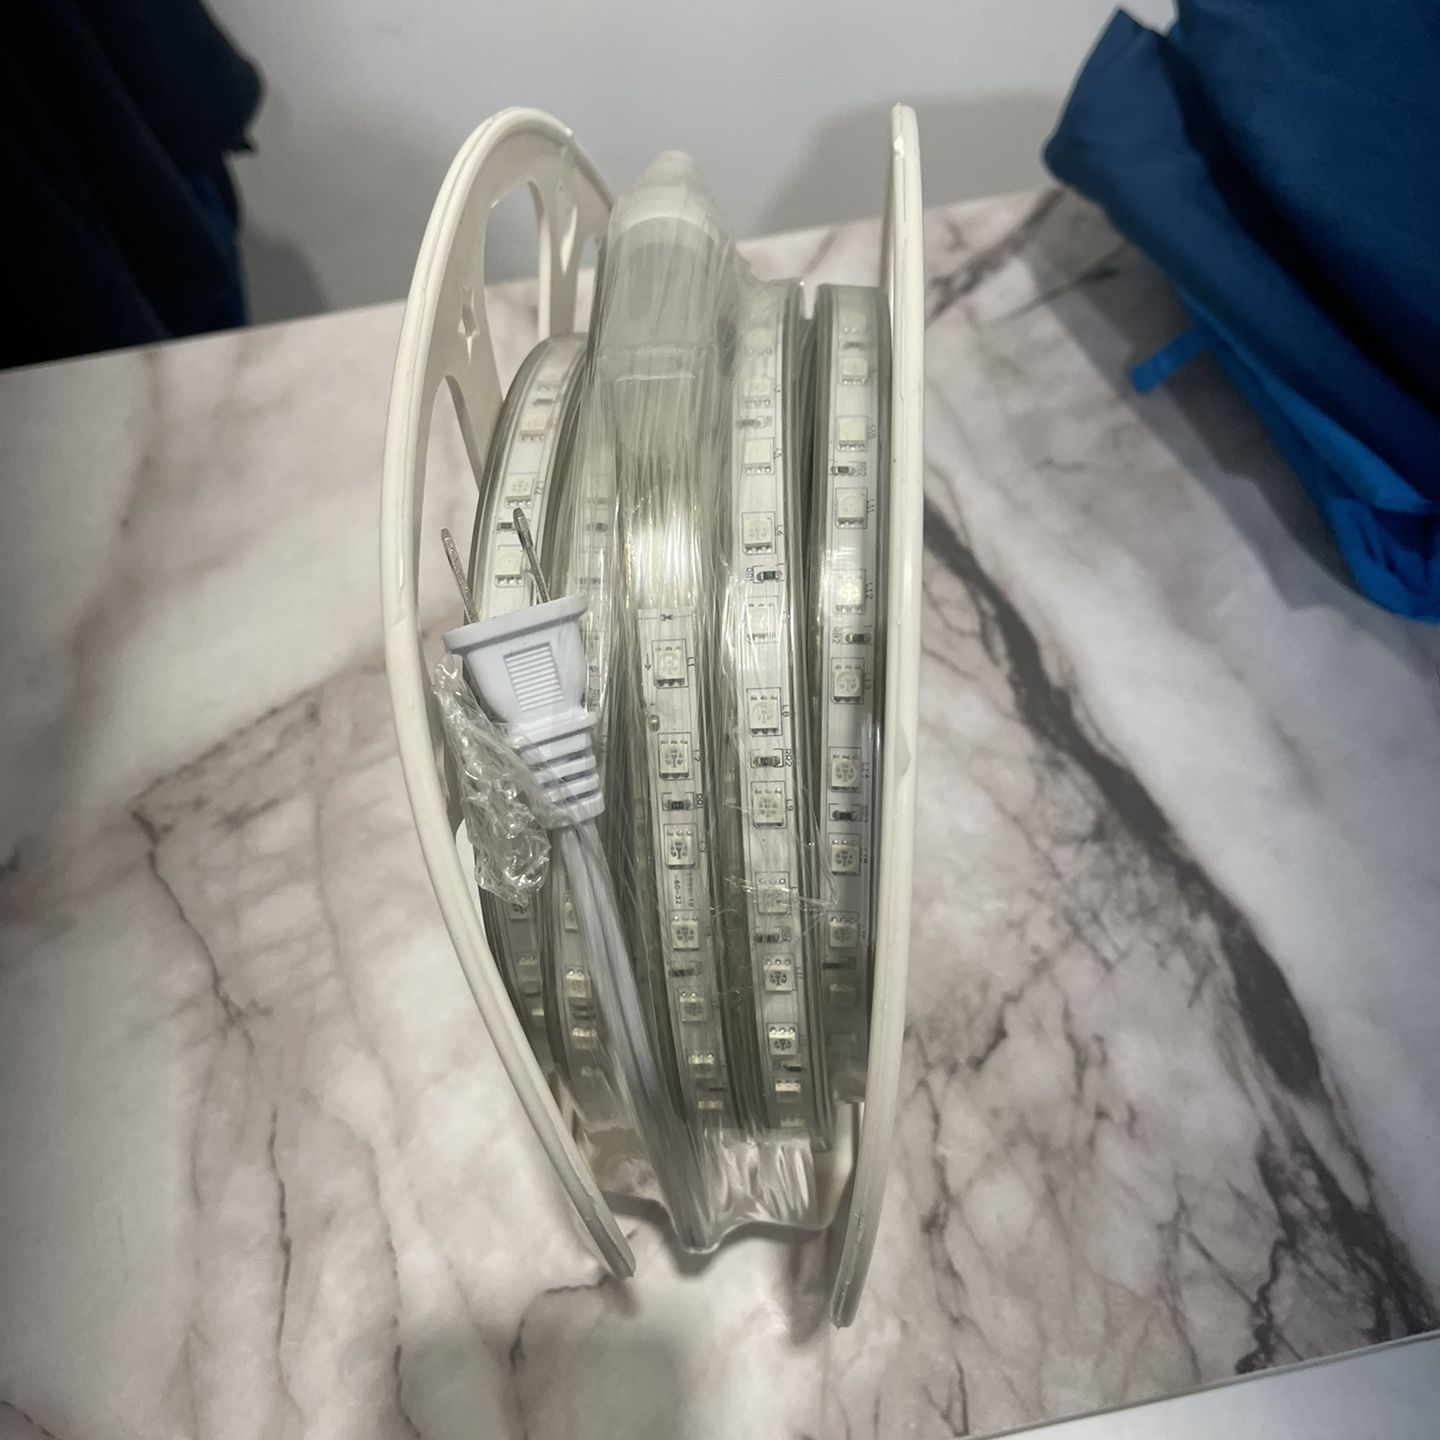 Short Led Strip Lights for Sale in New York, NY - OfferUp